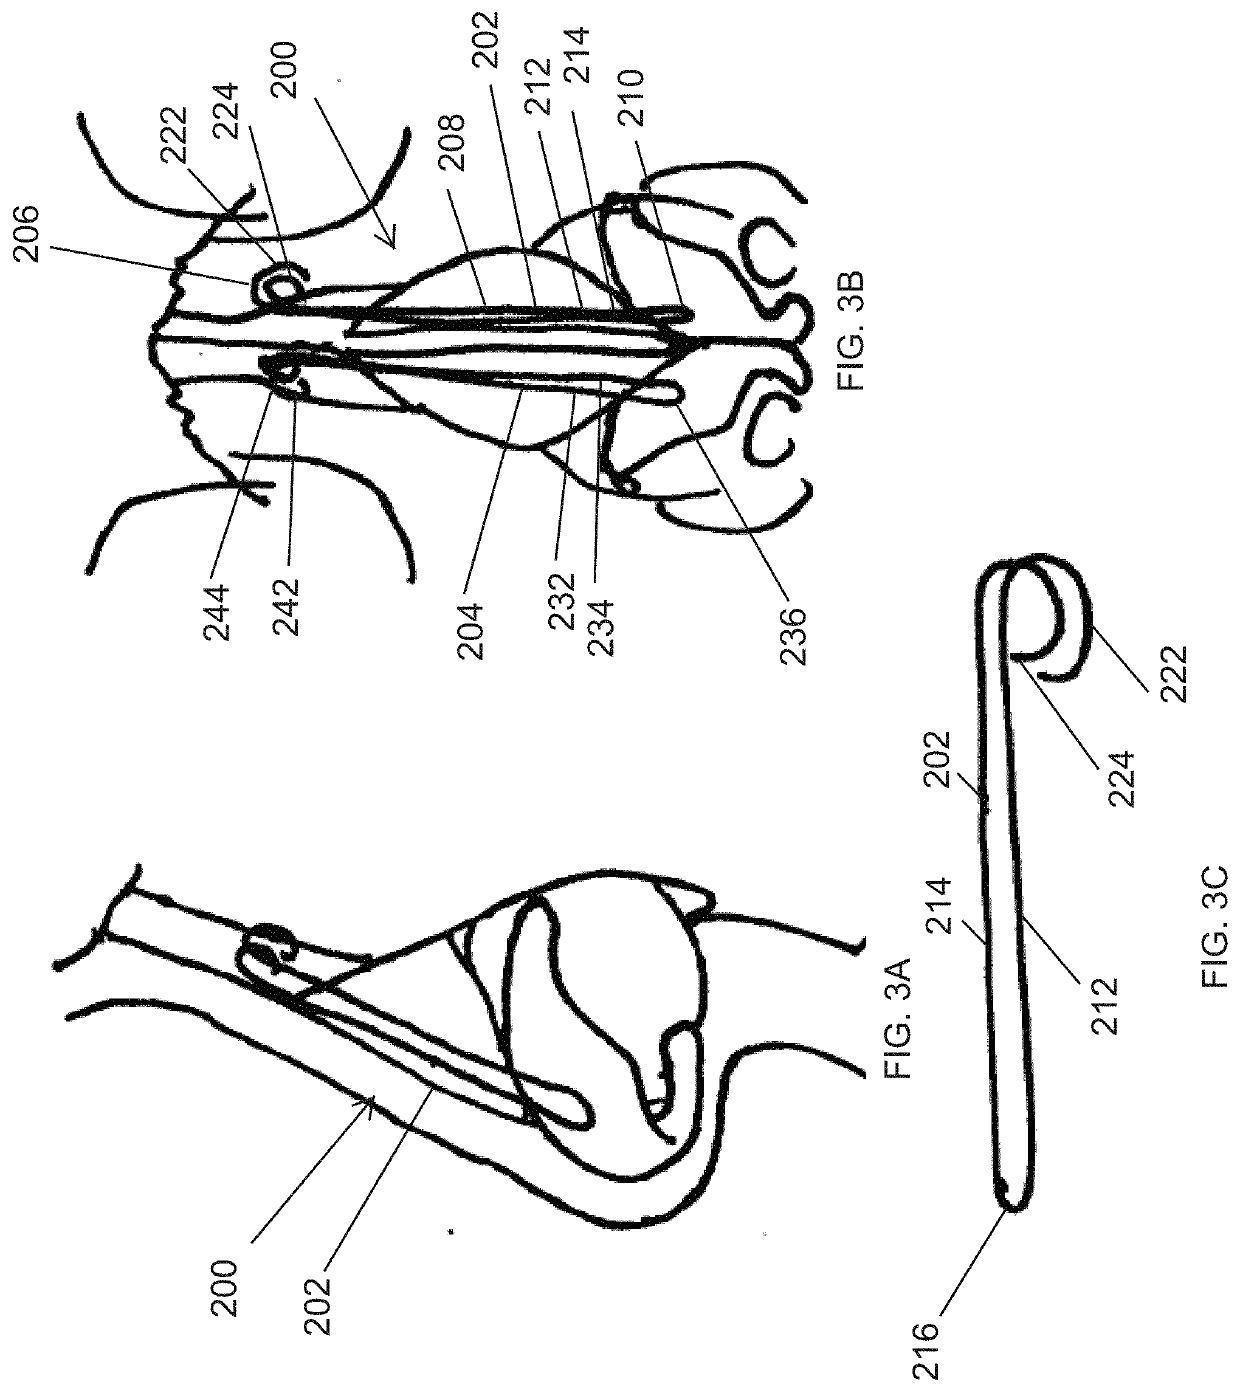 Systems and methods for nasal support